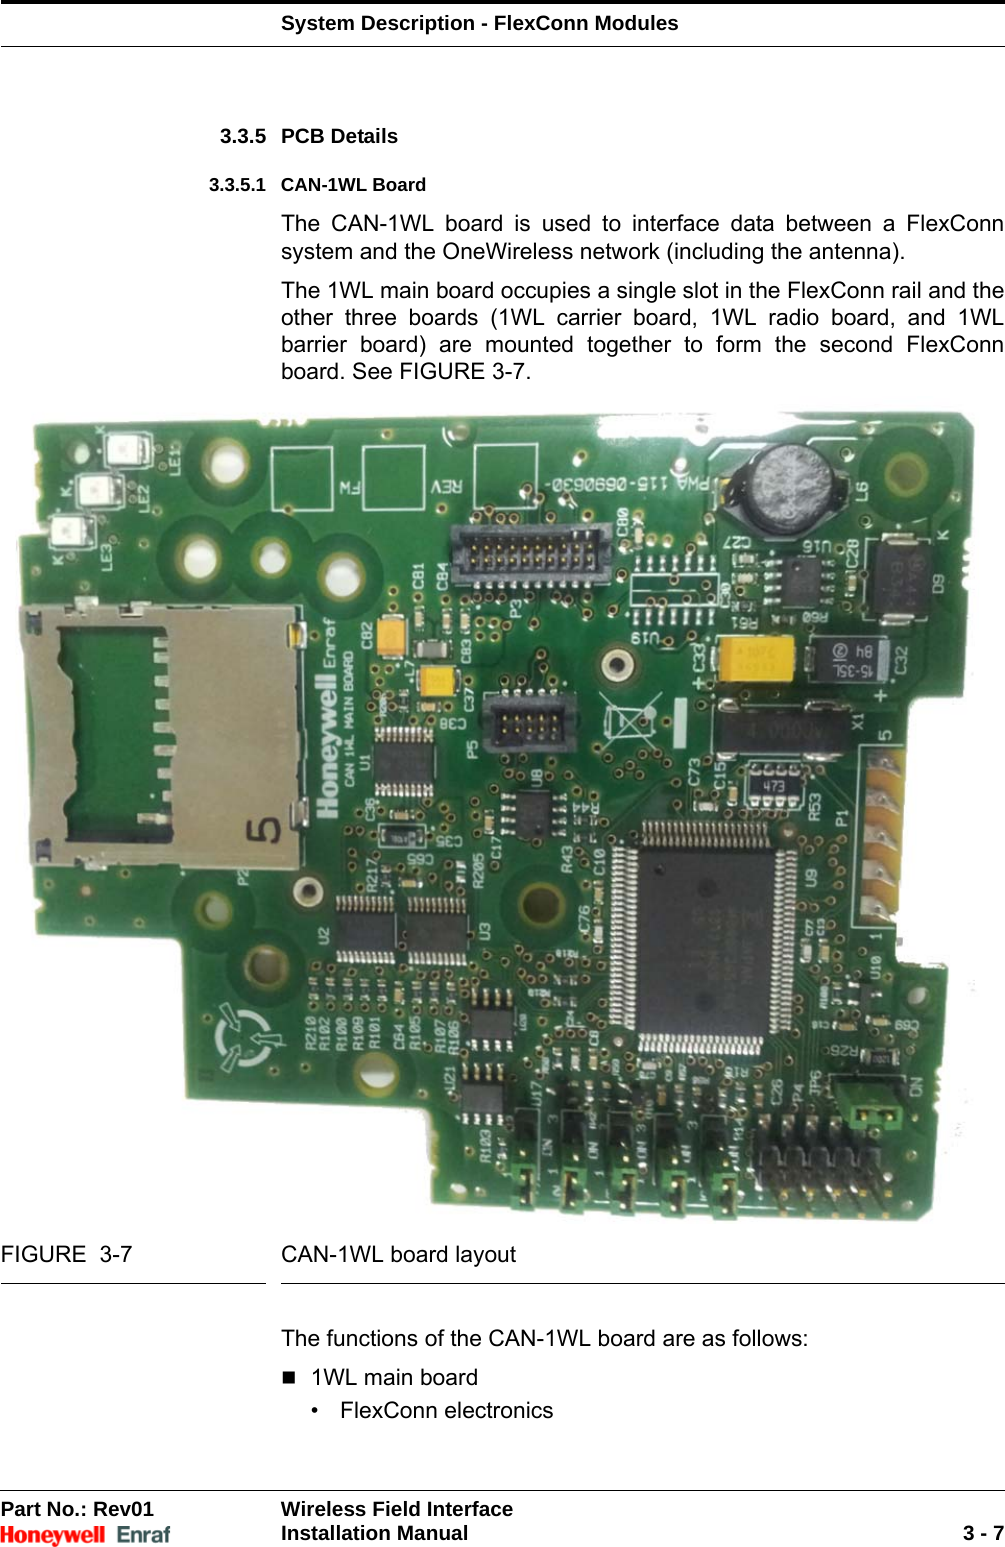 System Description - FlexConn ModulesPart No.: Rev01  Wireless Field InterfaceInstallation Manual 3 - 73.3.5 PCB Details3.3.5.1 CAN-1WL BoardThe CAN-1WL board is used to interface data between a FlexConn system and the OneWireless network (including the antenna).The 1WL main board occupies a single slot in the FlexConn rail and the other three boards (1WL carrier board, 1WL radio board, and 1WL barrier board) are mounted together to form the second FlexConn board. See FIGURE 3-7.FIGURE  3-7 CAN-1WL board layoutThe functions of the CAN-1WL board are as follows:1WL main board• FlexConn electronics